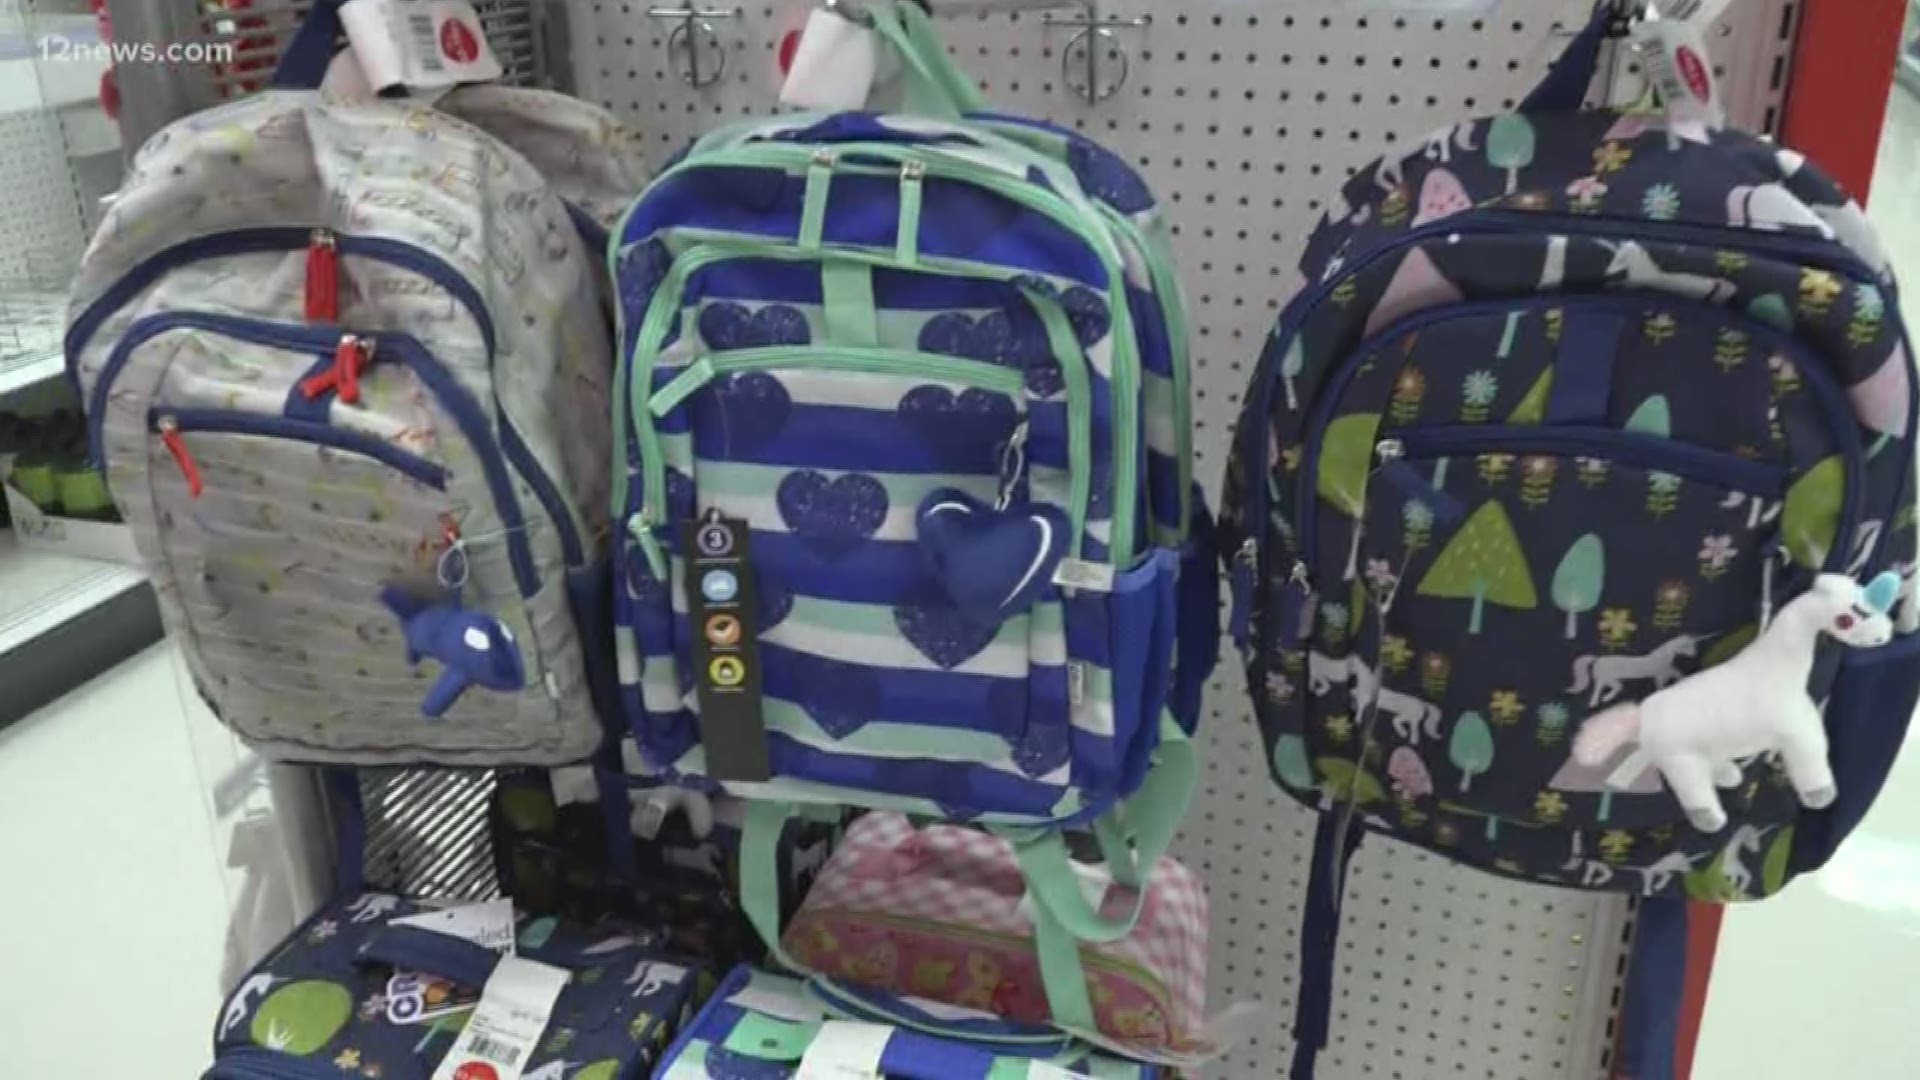 Douglas HS has banned backpacks from campus, Valley parents have different opinions about the new rule.